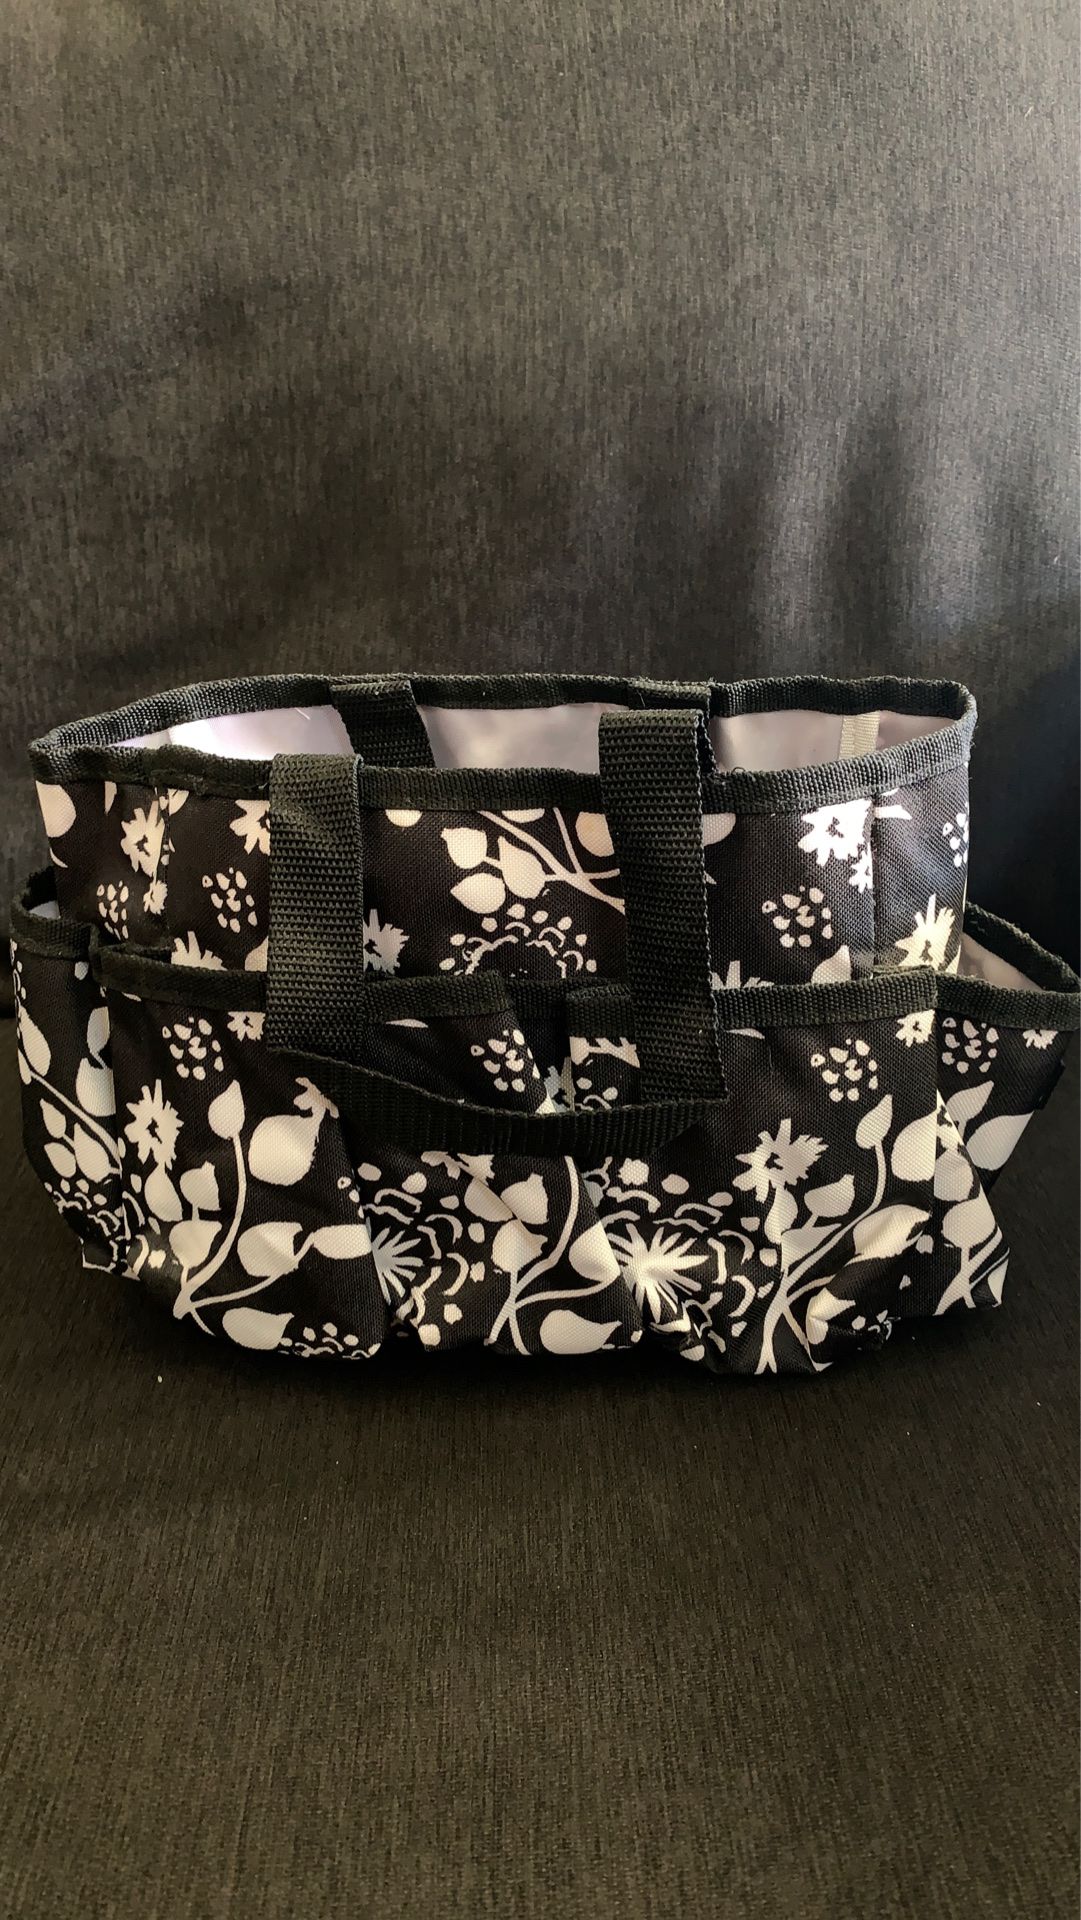 Black and white flowers thirty-one tote bag organizer